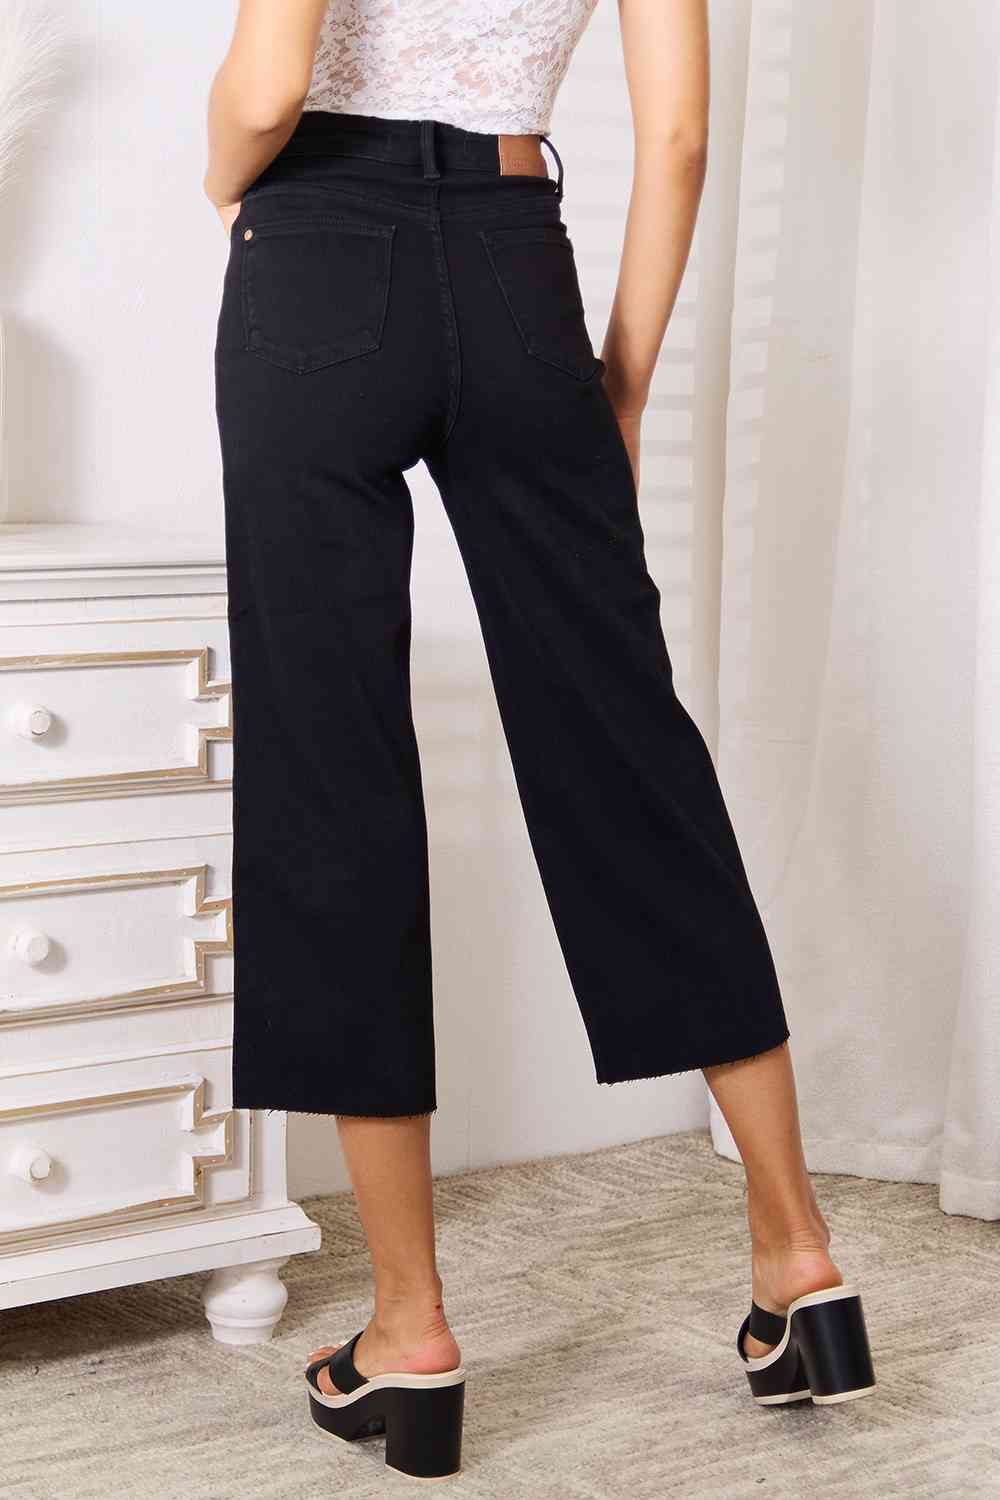 Back View, Judy Blue, High Waist Wide Leg Black Stretchy Cropped Jeans Style 88710